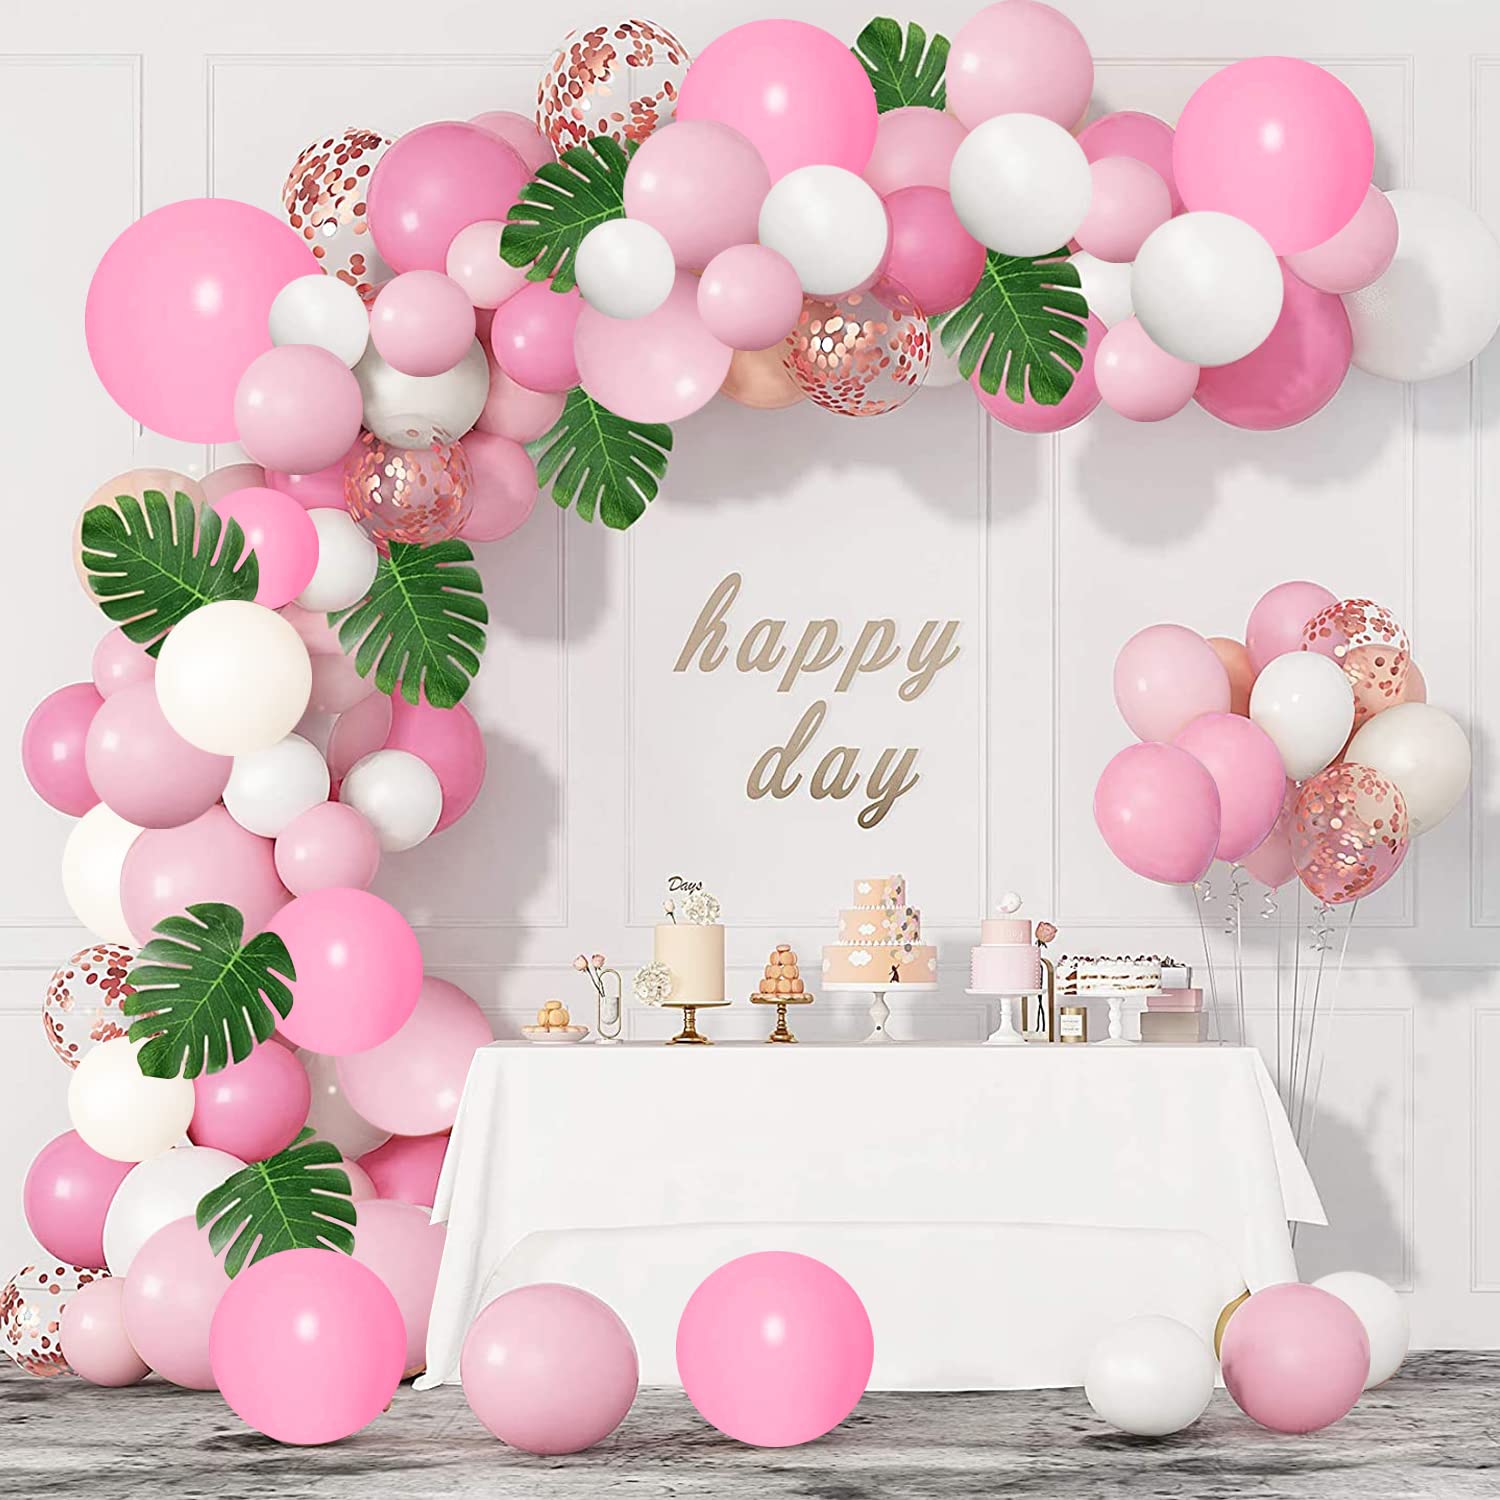 Pink-Themed-Balloon-Decor-for-Birthday-Party